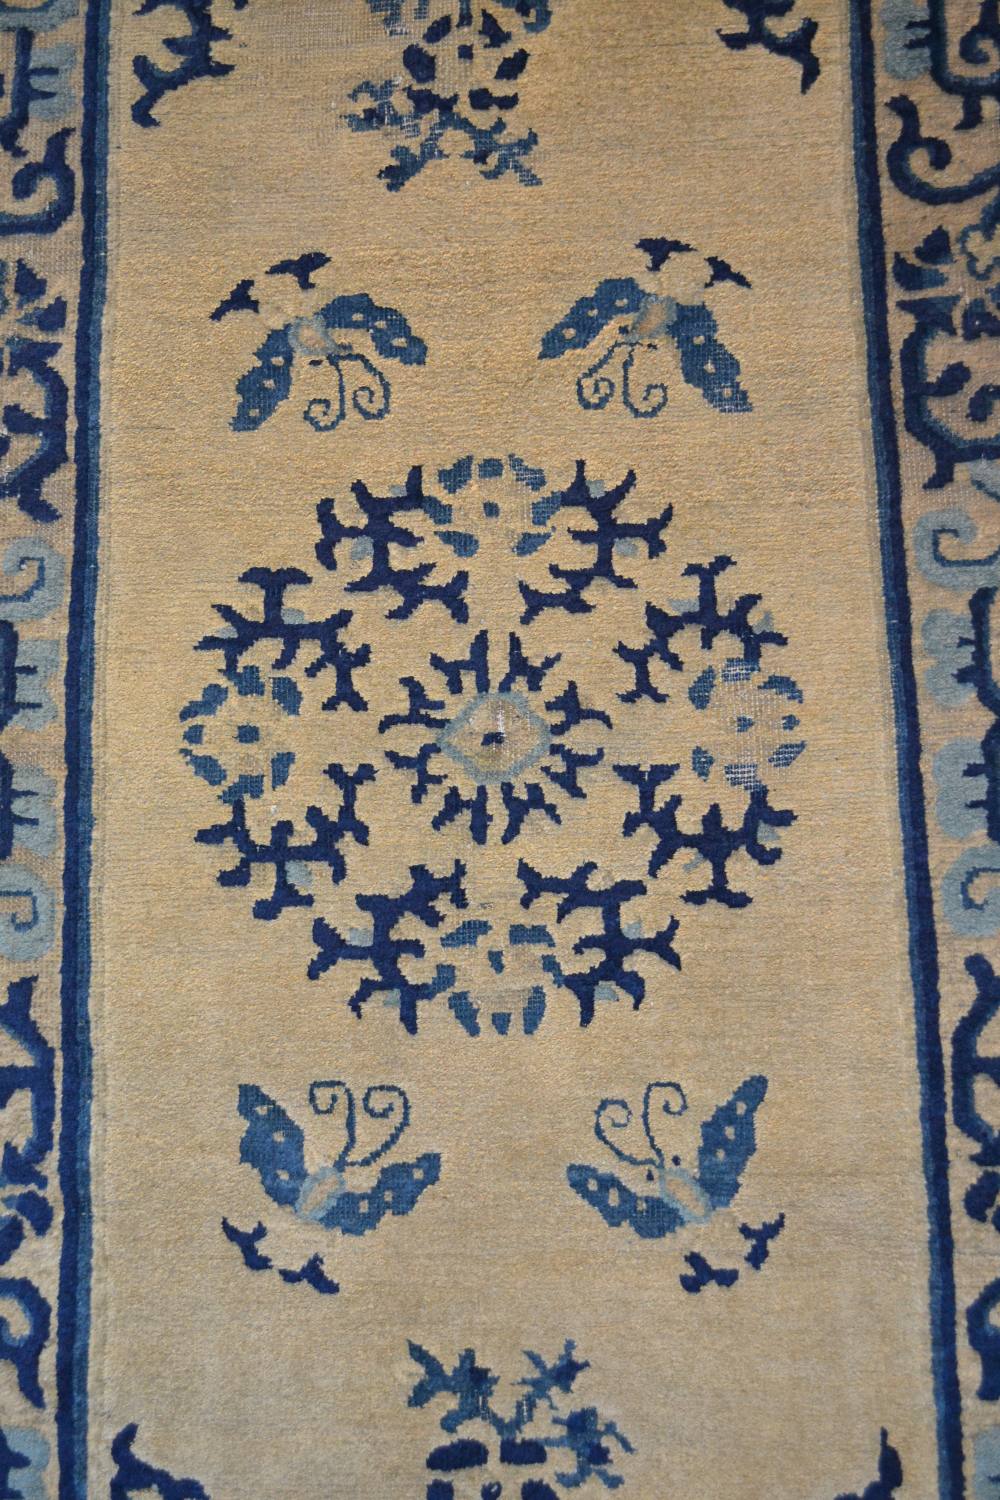 Baotou-Suiyuan rug, north west China, early 20th century, 4ft. 10in. x 2ft. 8in. 1.47m. x 0.81m. - Image 4 of 6